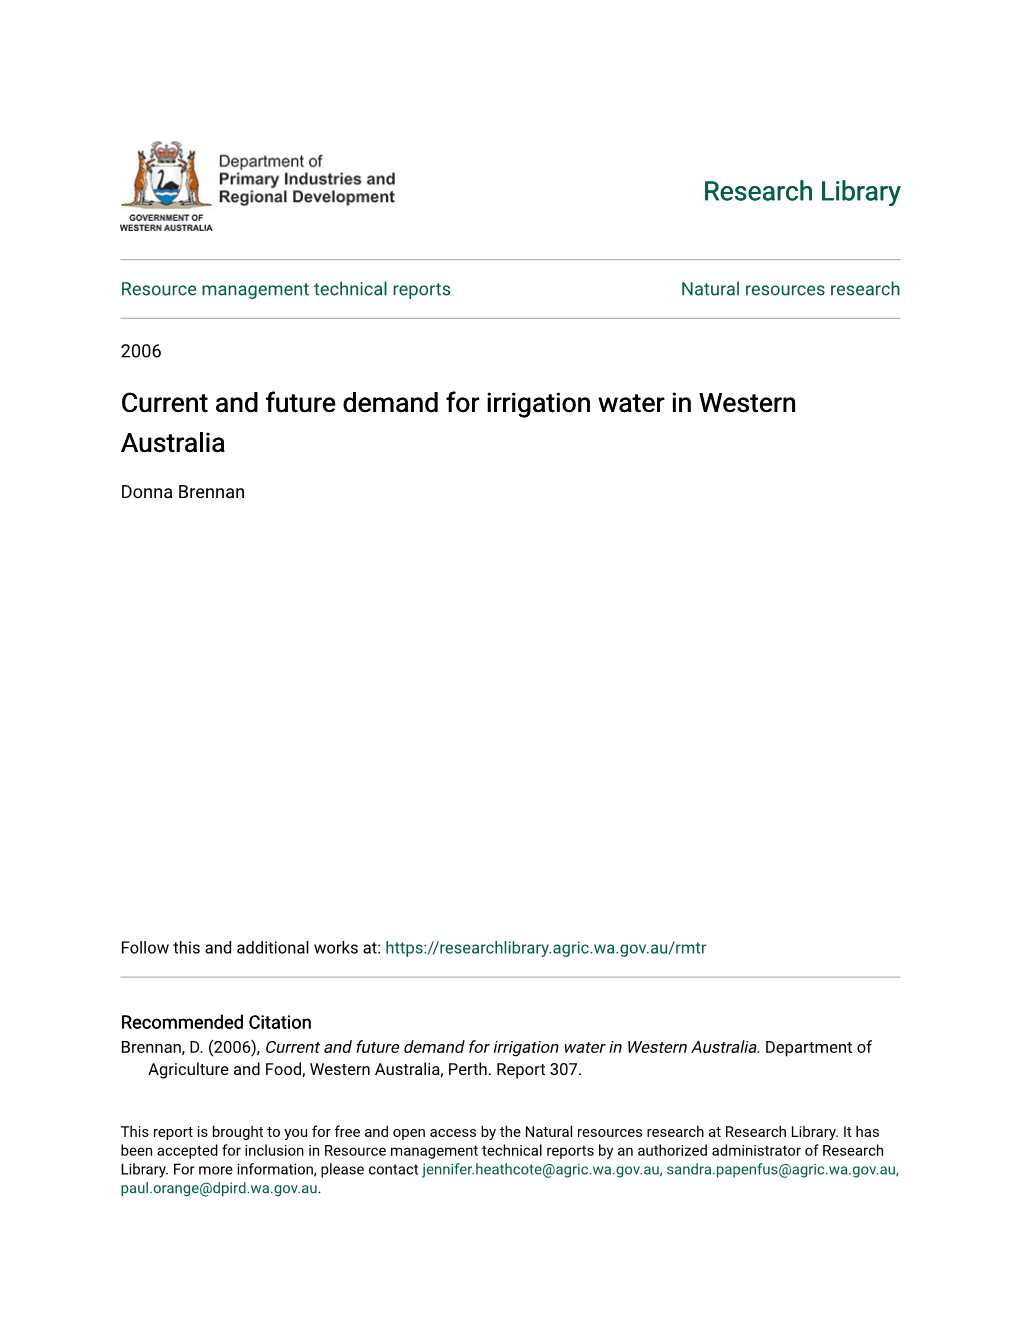 Current and Future Demand for Irrigation Water in Western Australia